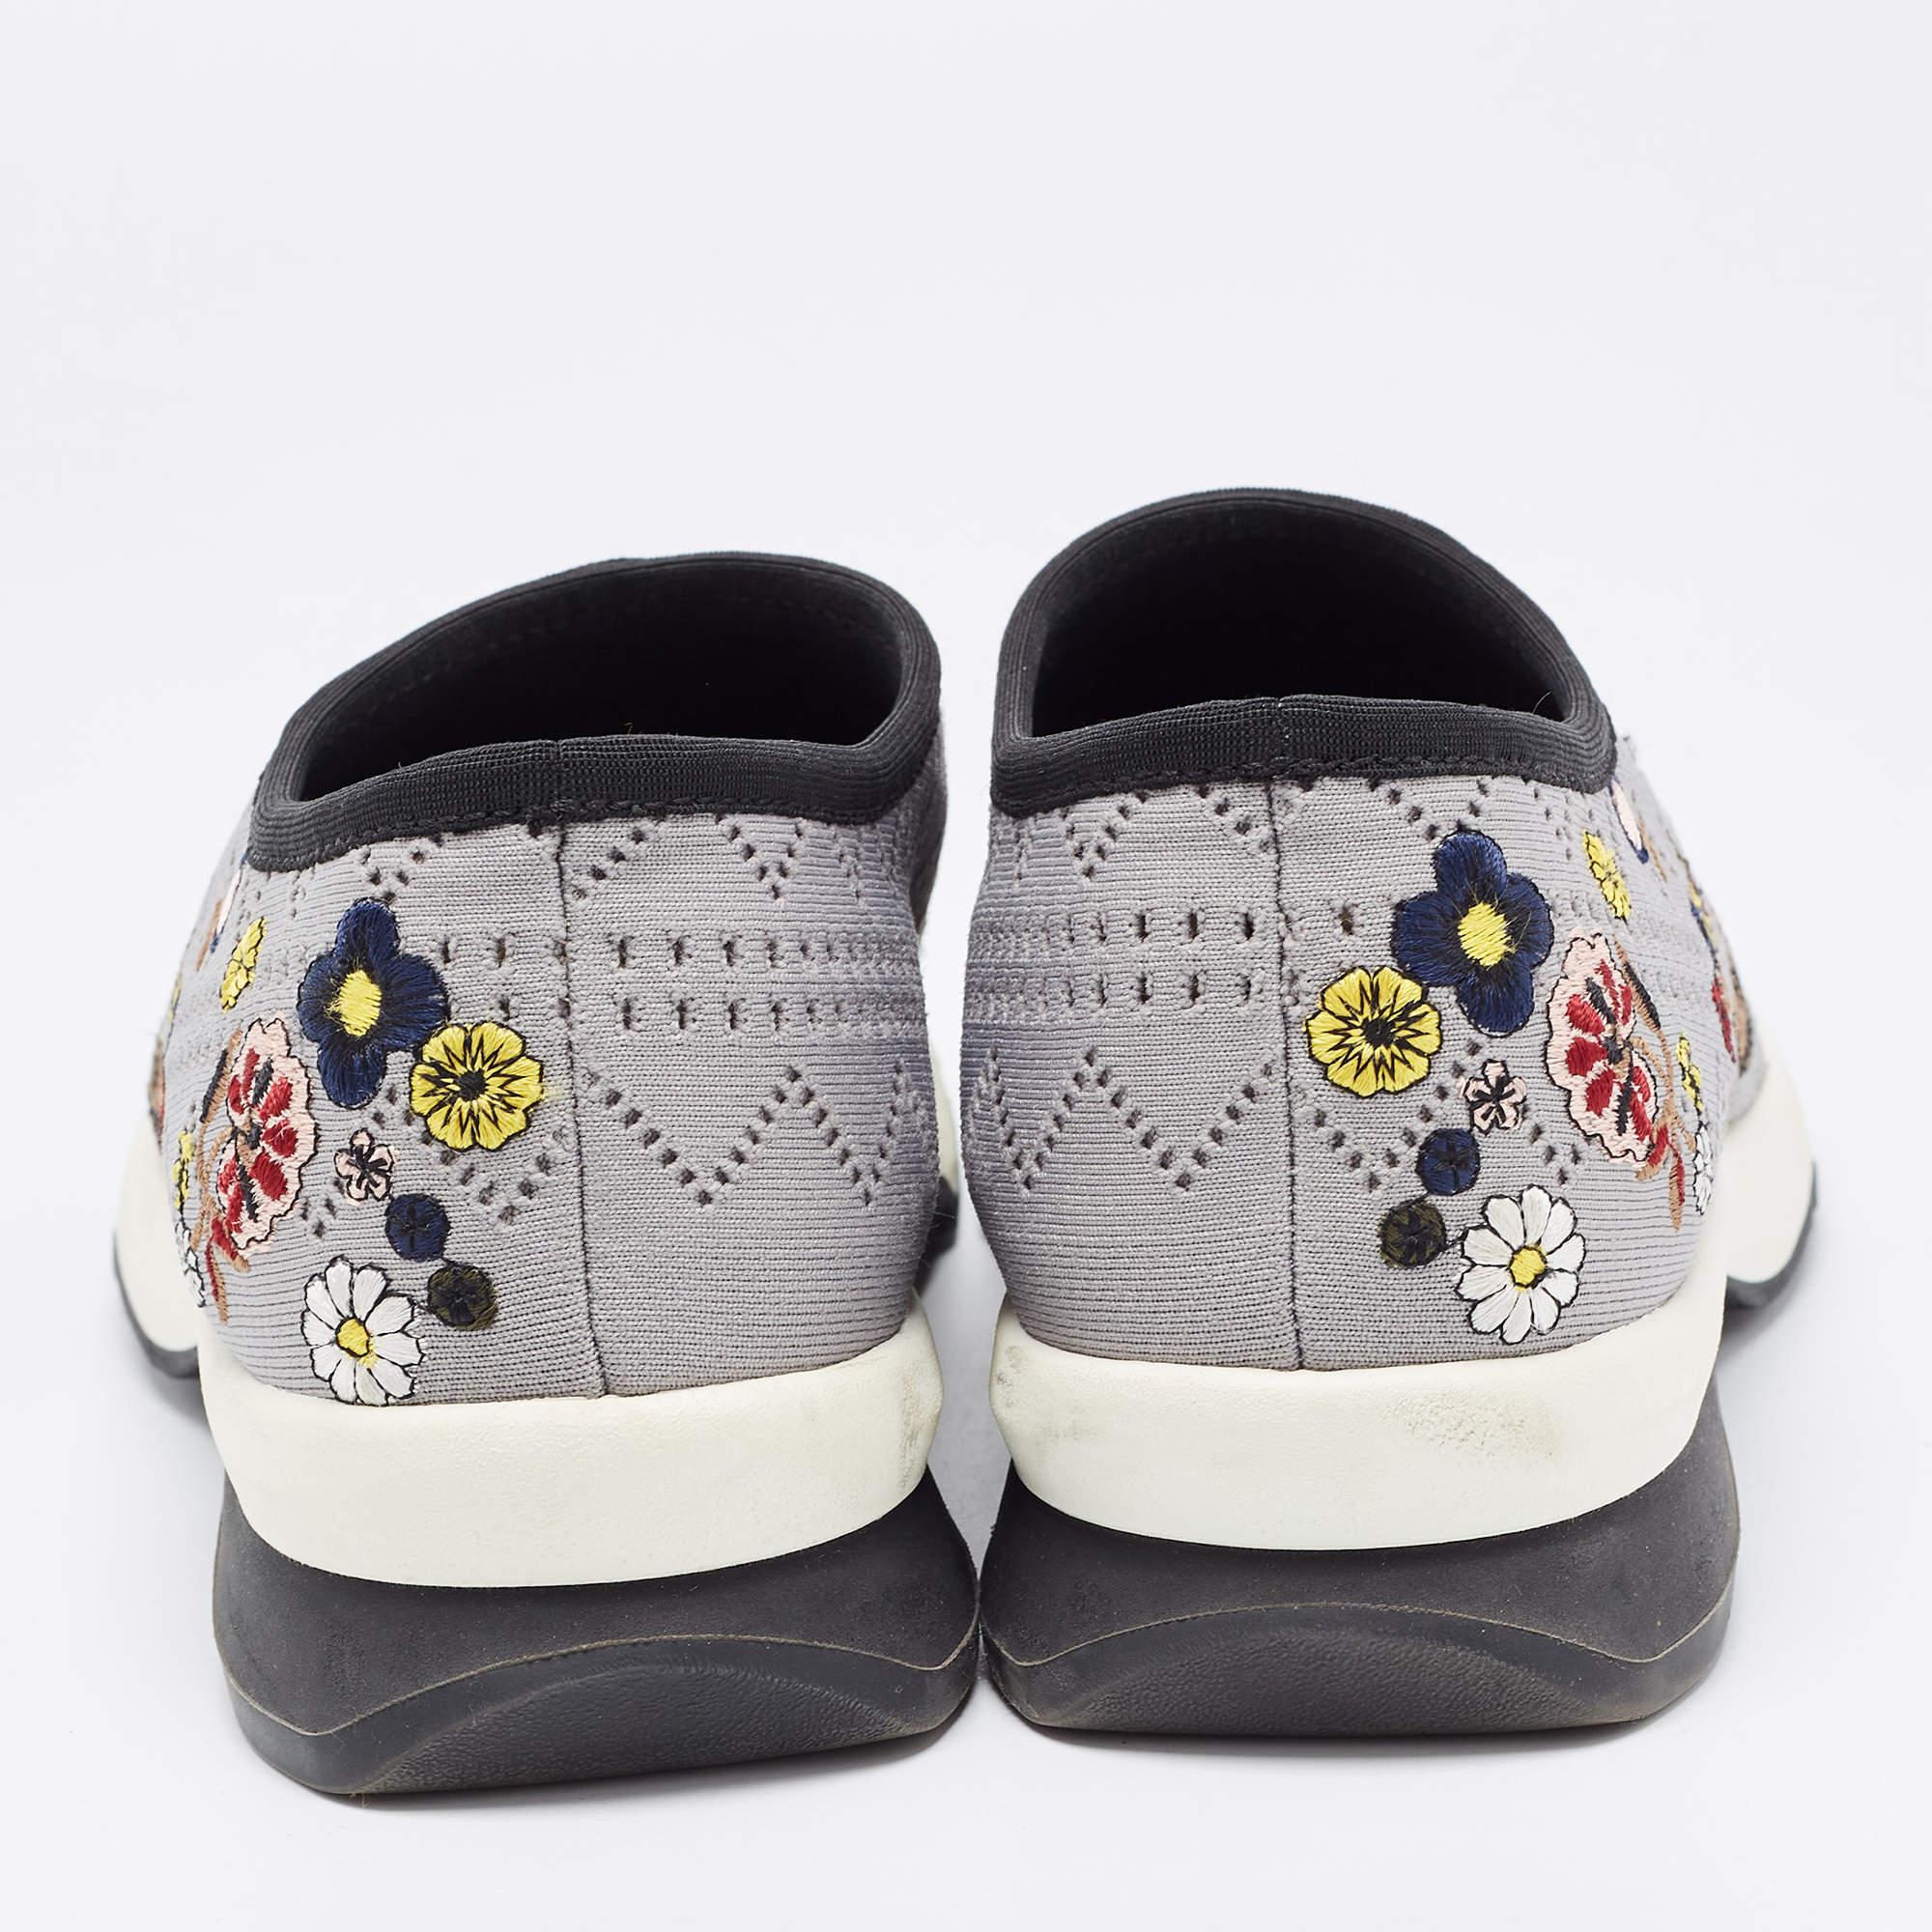 Fendi Grey Floral Embroidered Knit Fabric Slip On Sneakers Size 38 For Sale 2